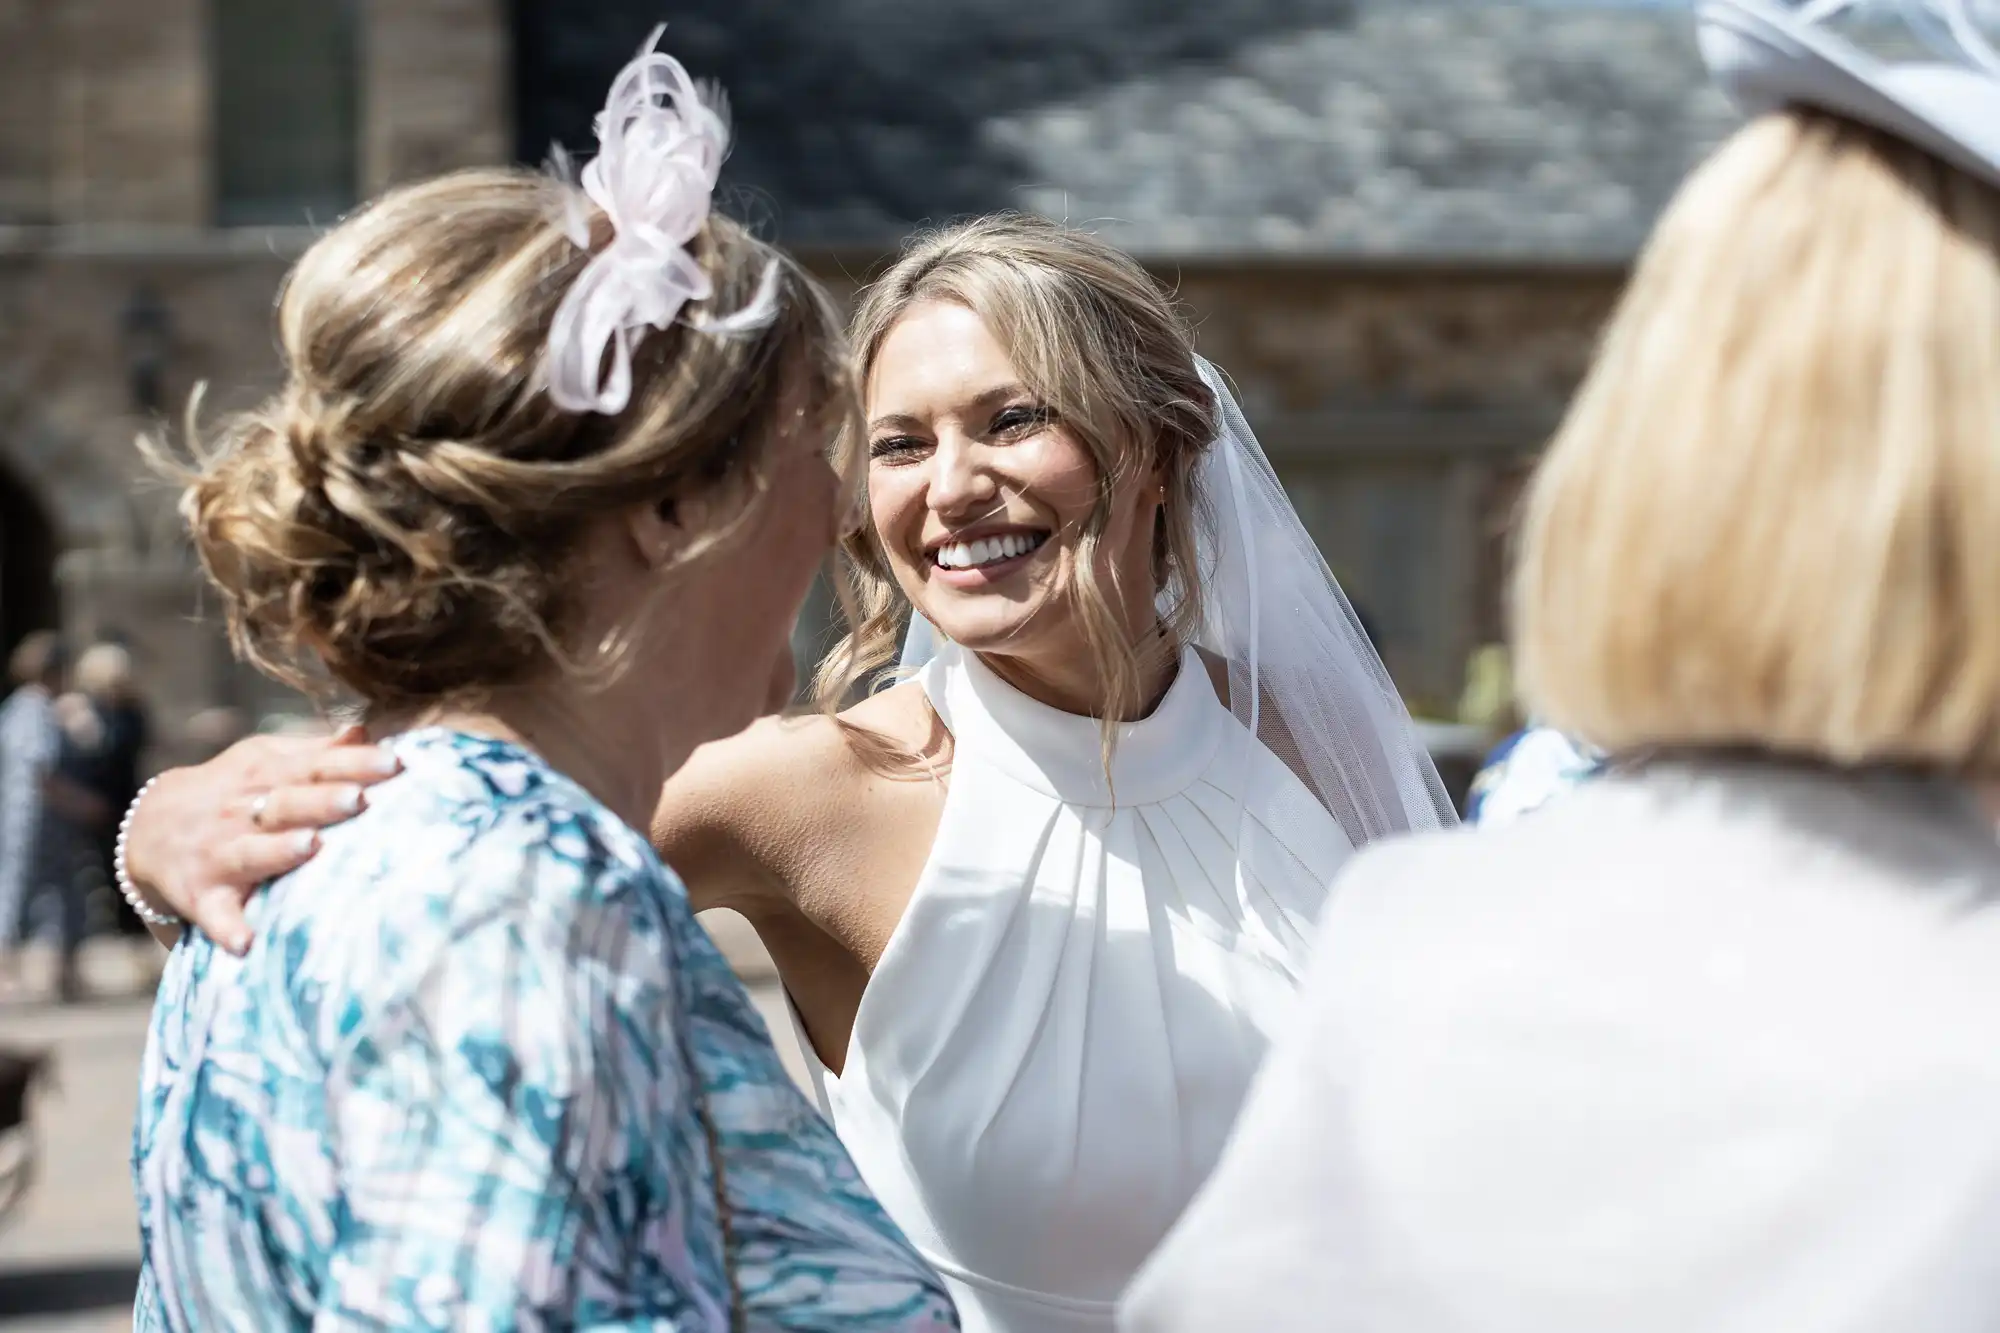 A bride in a white dress and veil smiles joyfully while talking with two women in formal attire at an outdoor event.